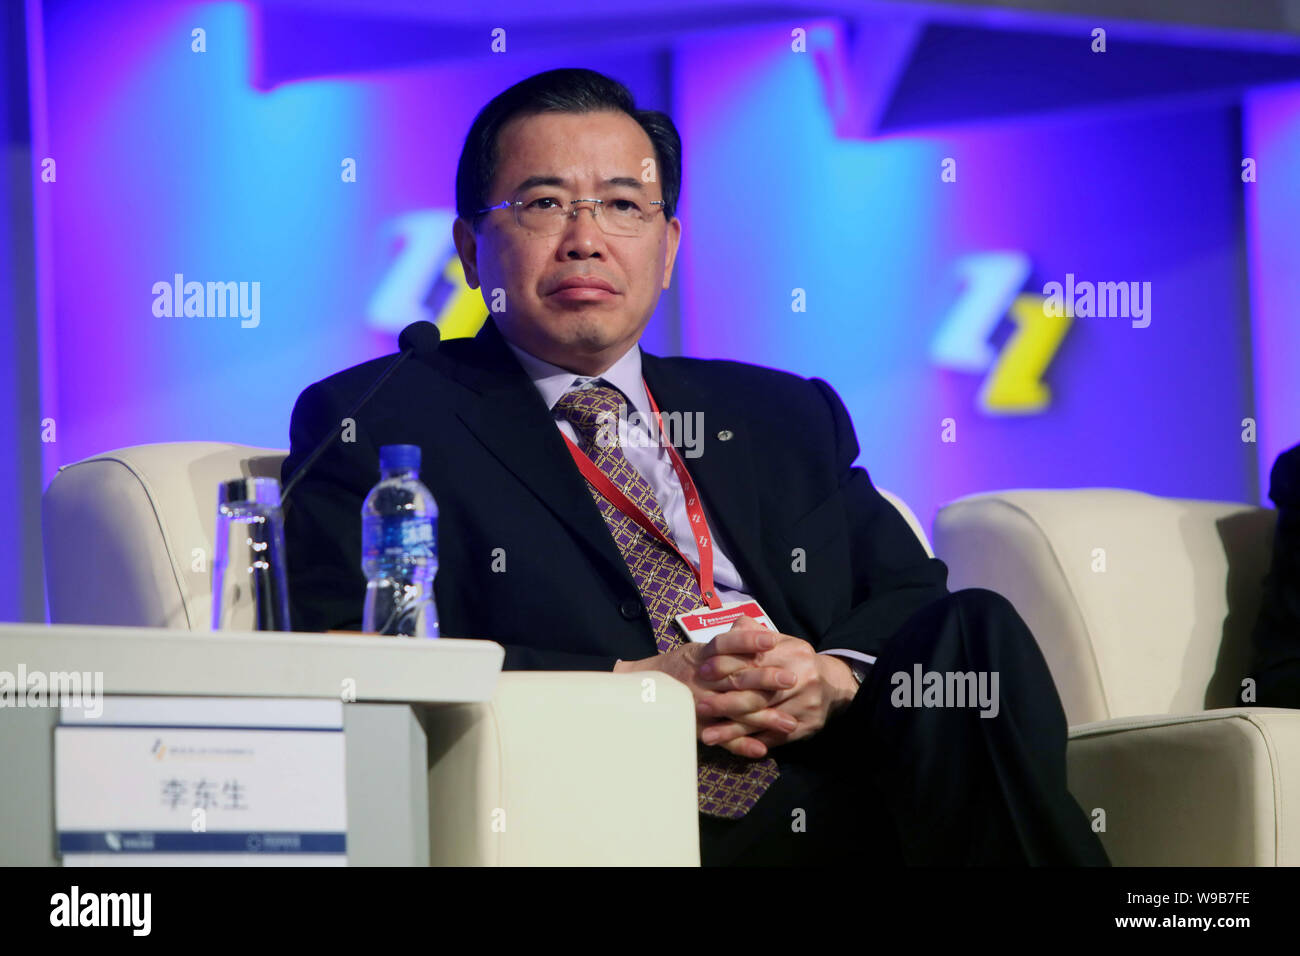 Li Dongsheng, President of TCL Group, is seen at the 9th China Entrepreneur Summit 2010 in Beijing, China, December 5, 2010.   Themed by New Business, Stock Photo